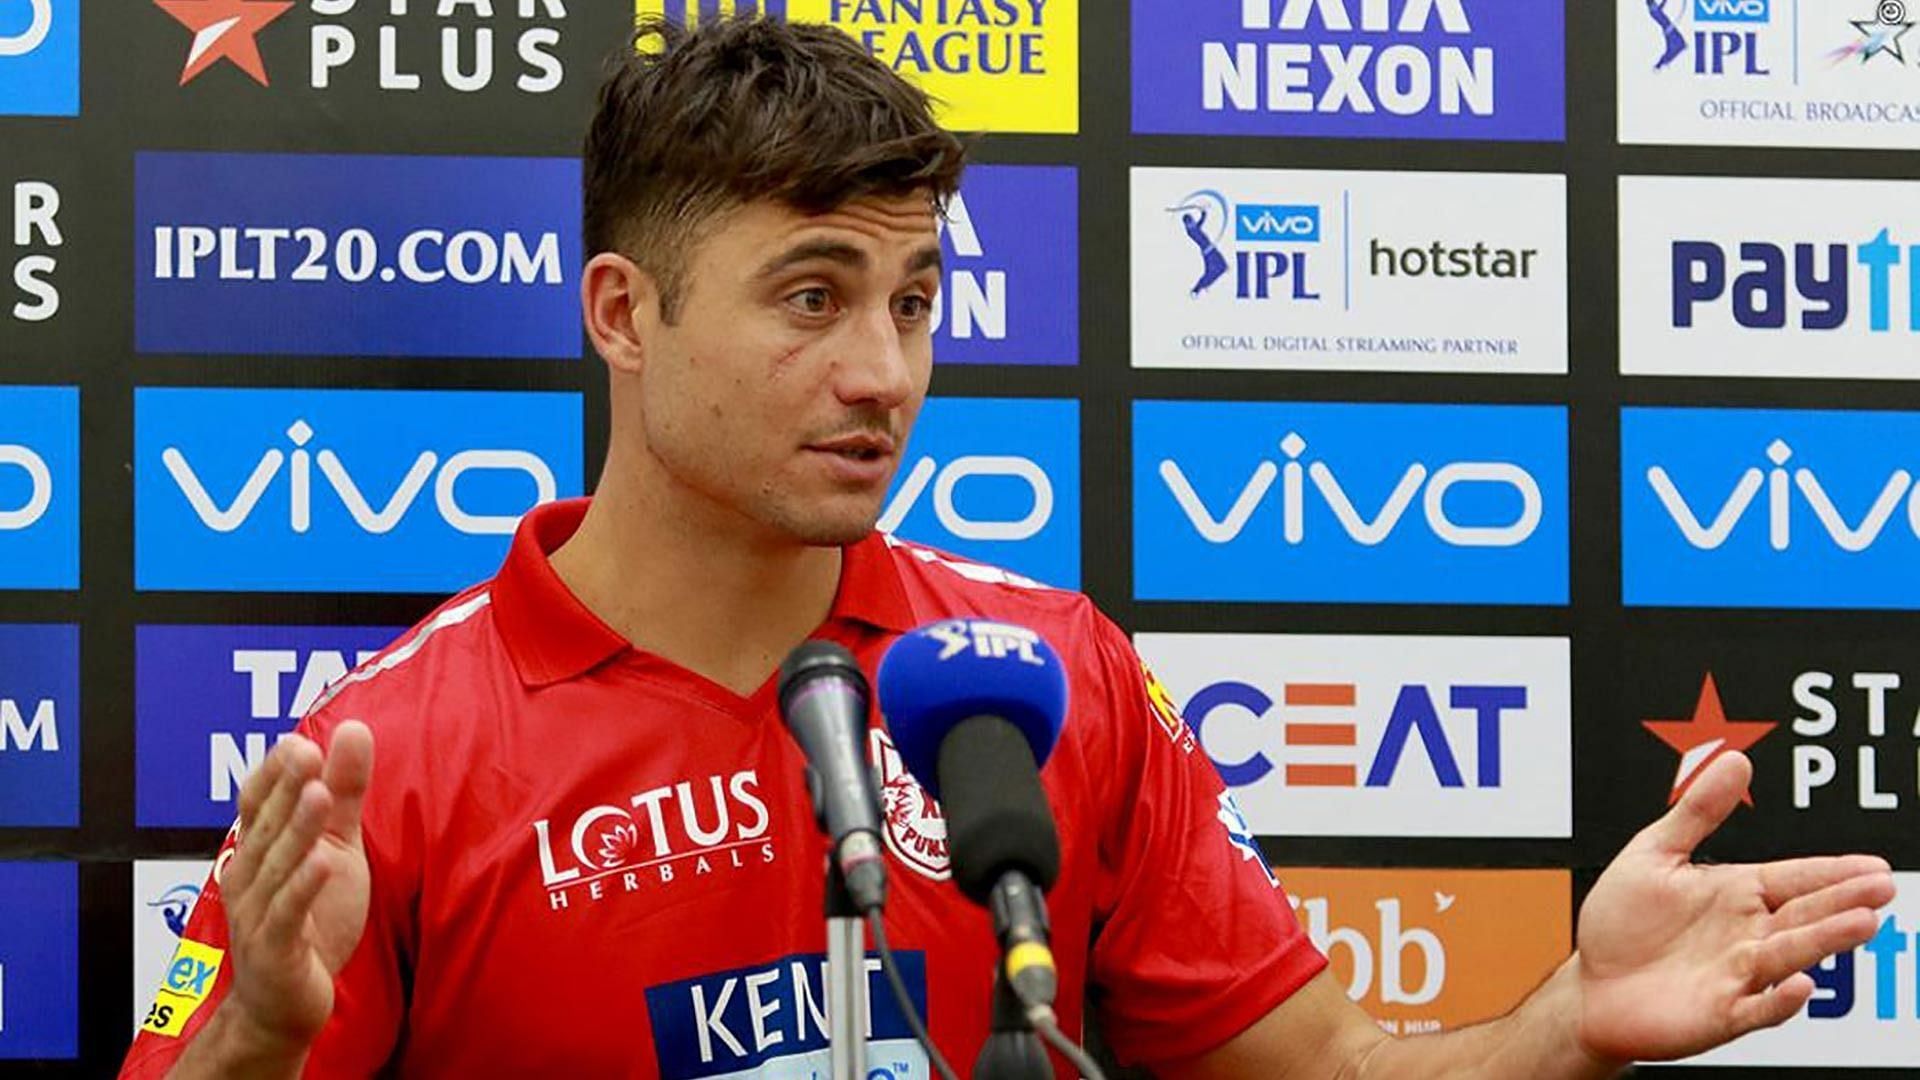 Marcus Stoinis played for Punjab from 2016&ndash;18 in the IPL (Image via IPLT20.com)